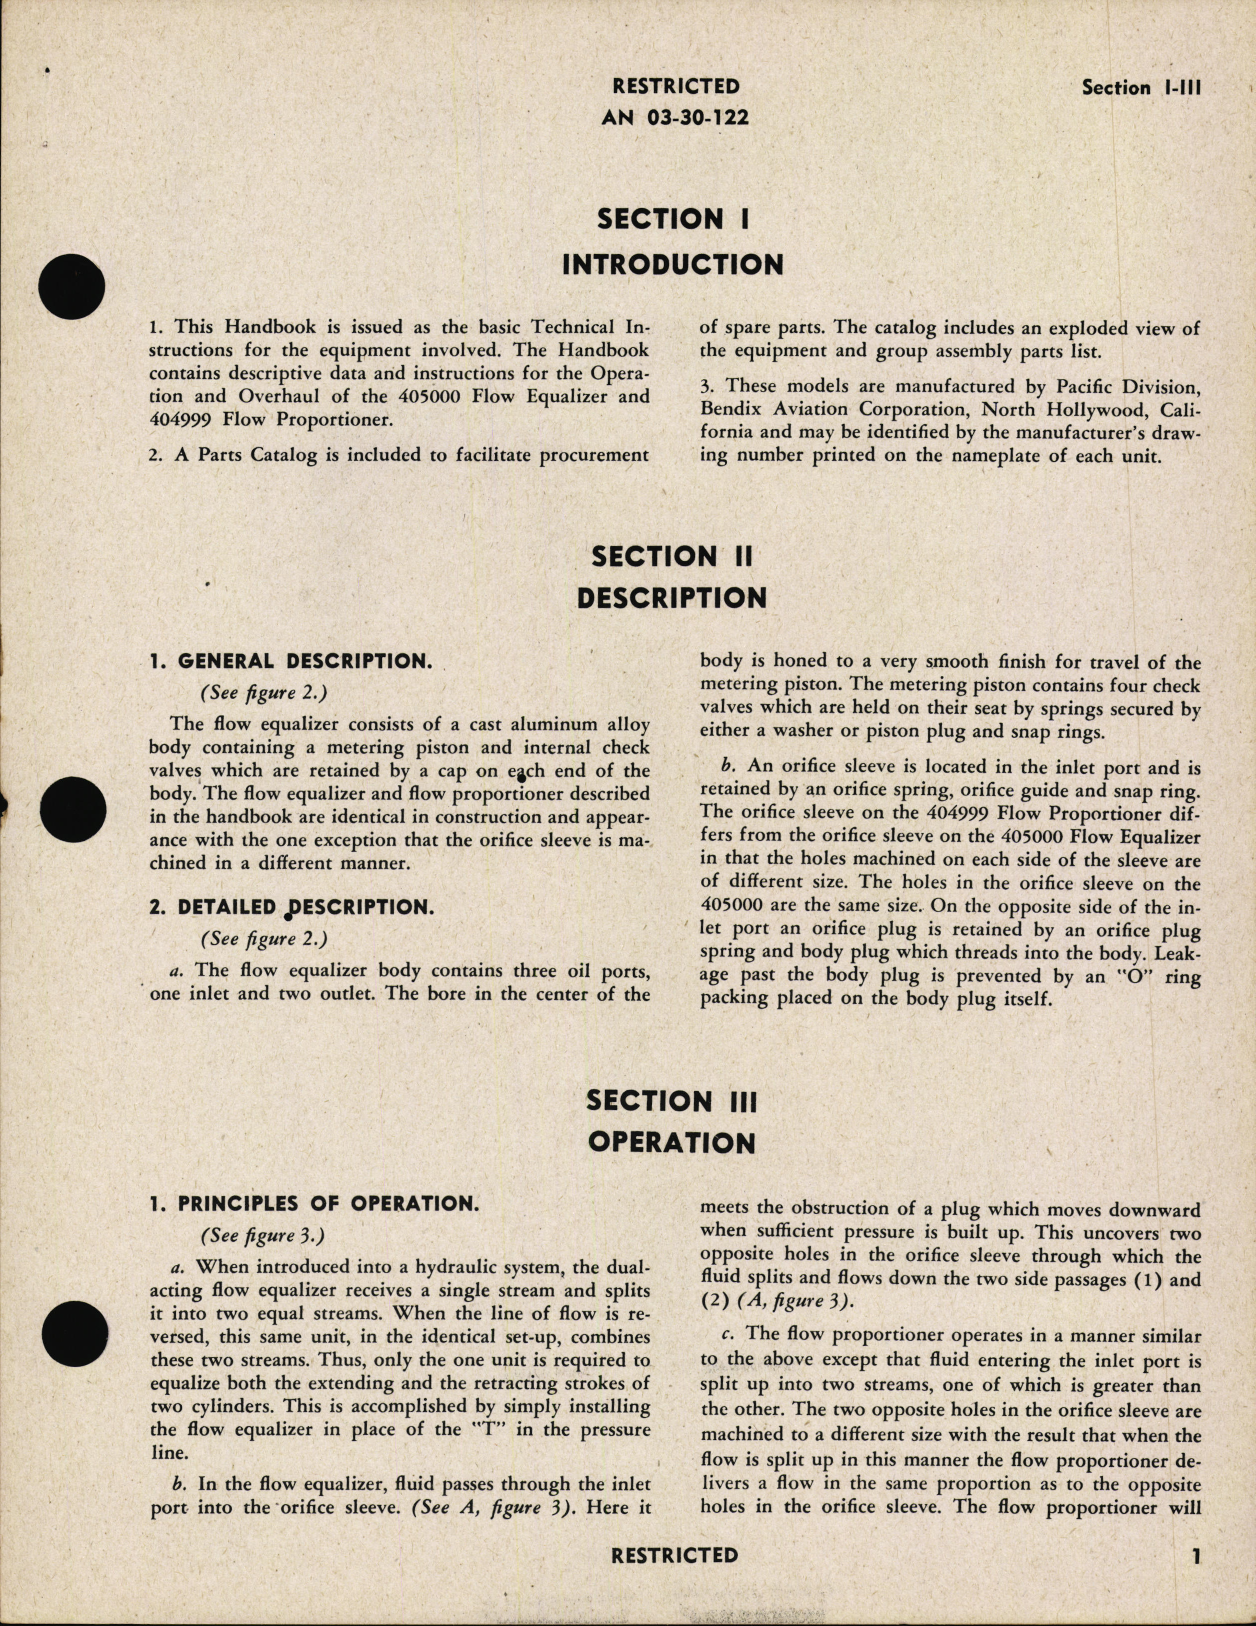 Sample page 5 from AirCorps Library document: Handbook of Overhaul Instructions with Parts Catalog for Hydraulic Flow Equalizer and Proportioner